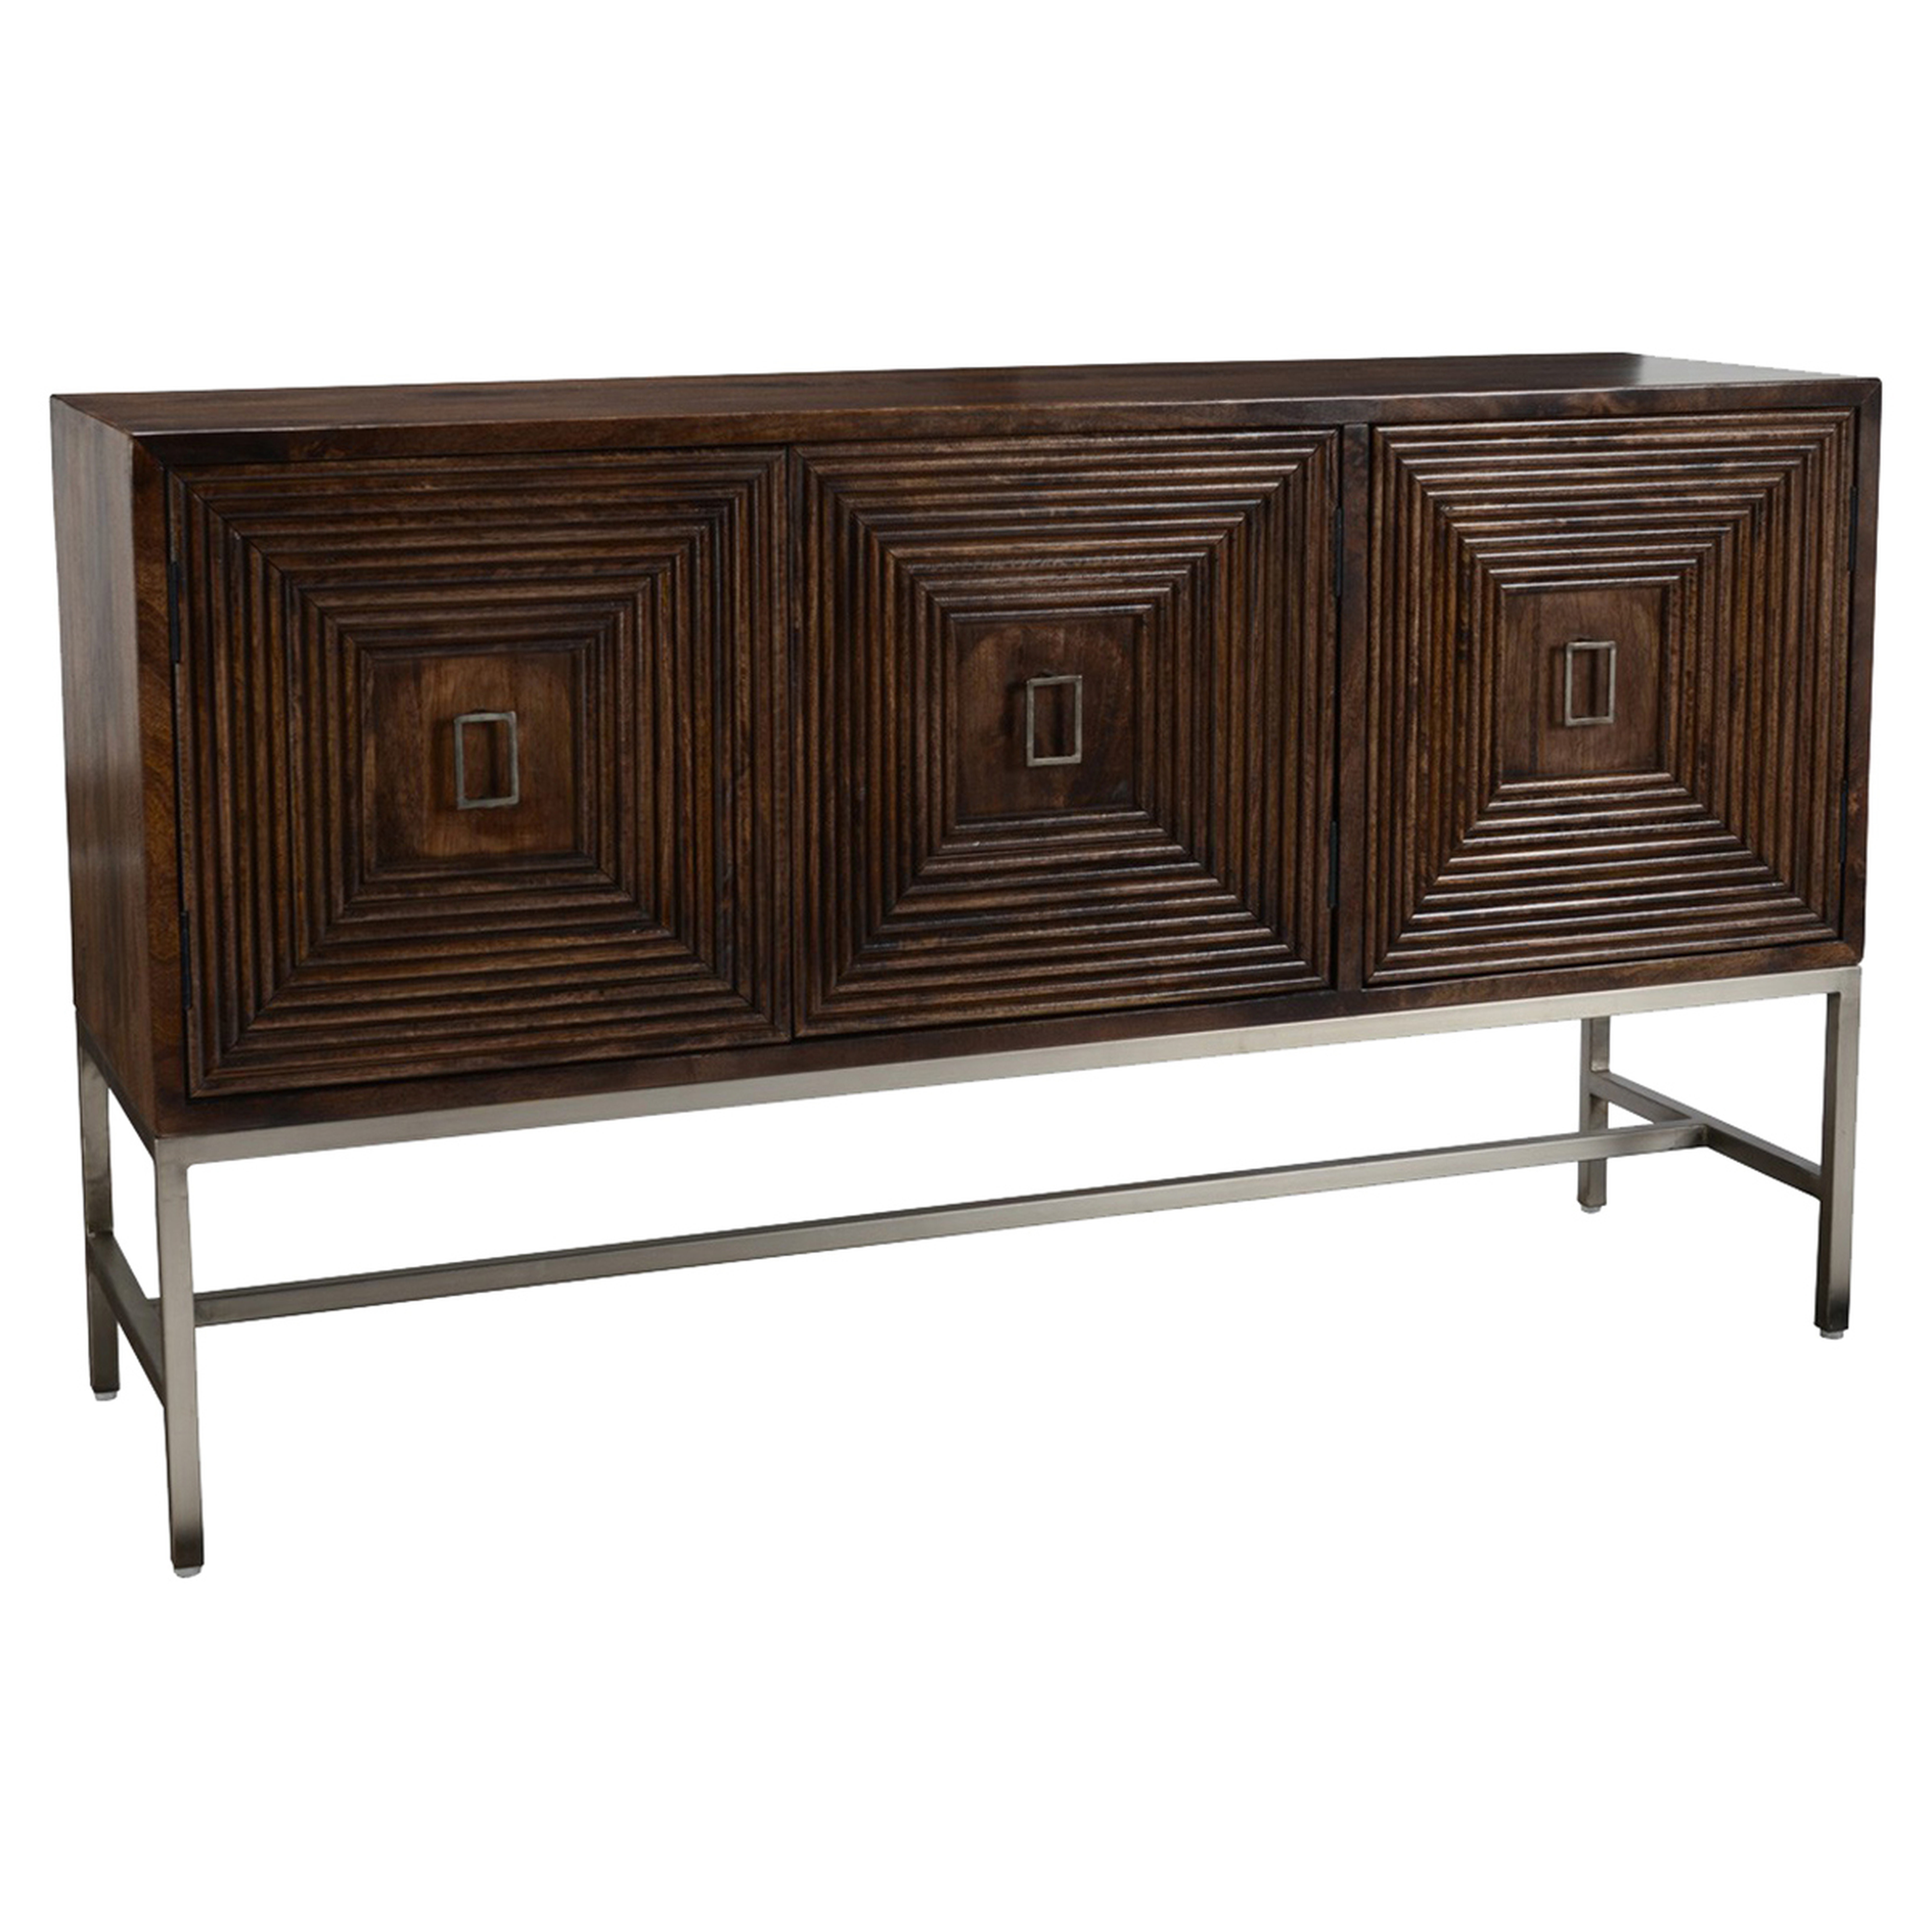 Abdul Rustic Lodge Brown 3-Door Patterned Silver Base Sideboard - Kathy Kuo Home